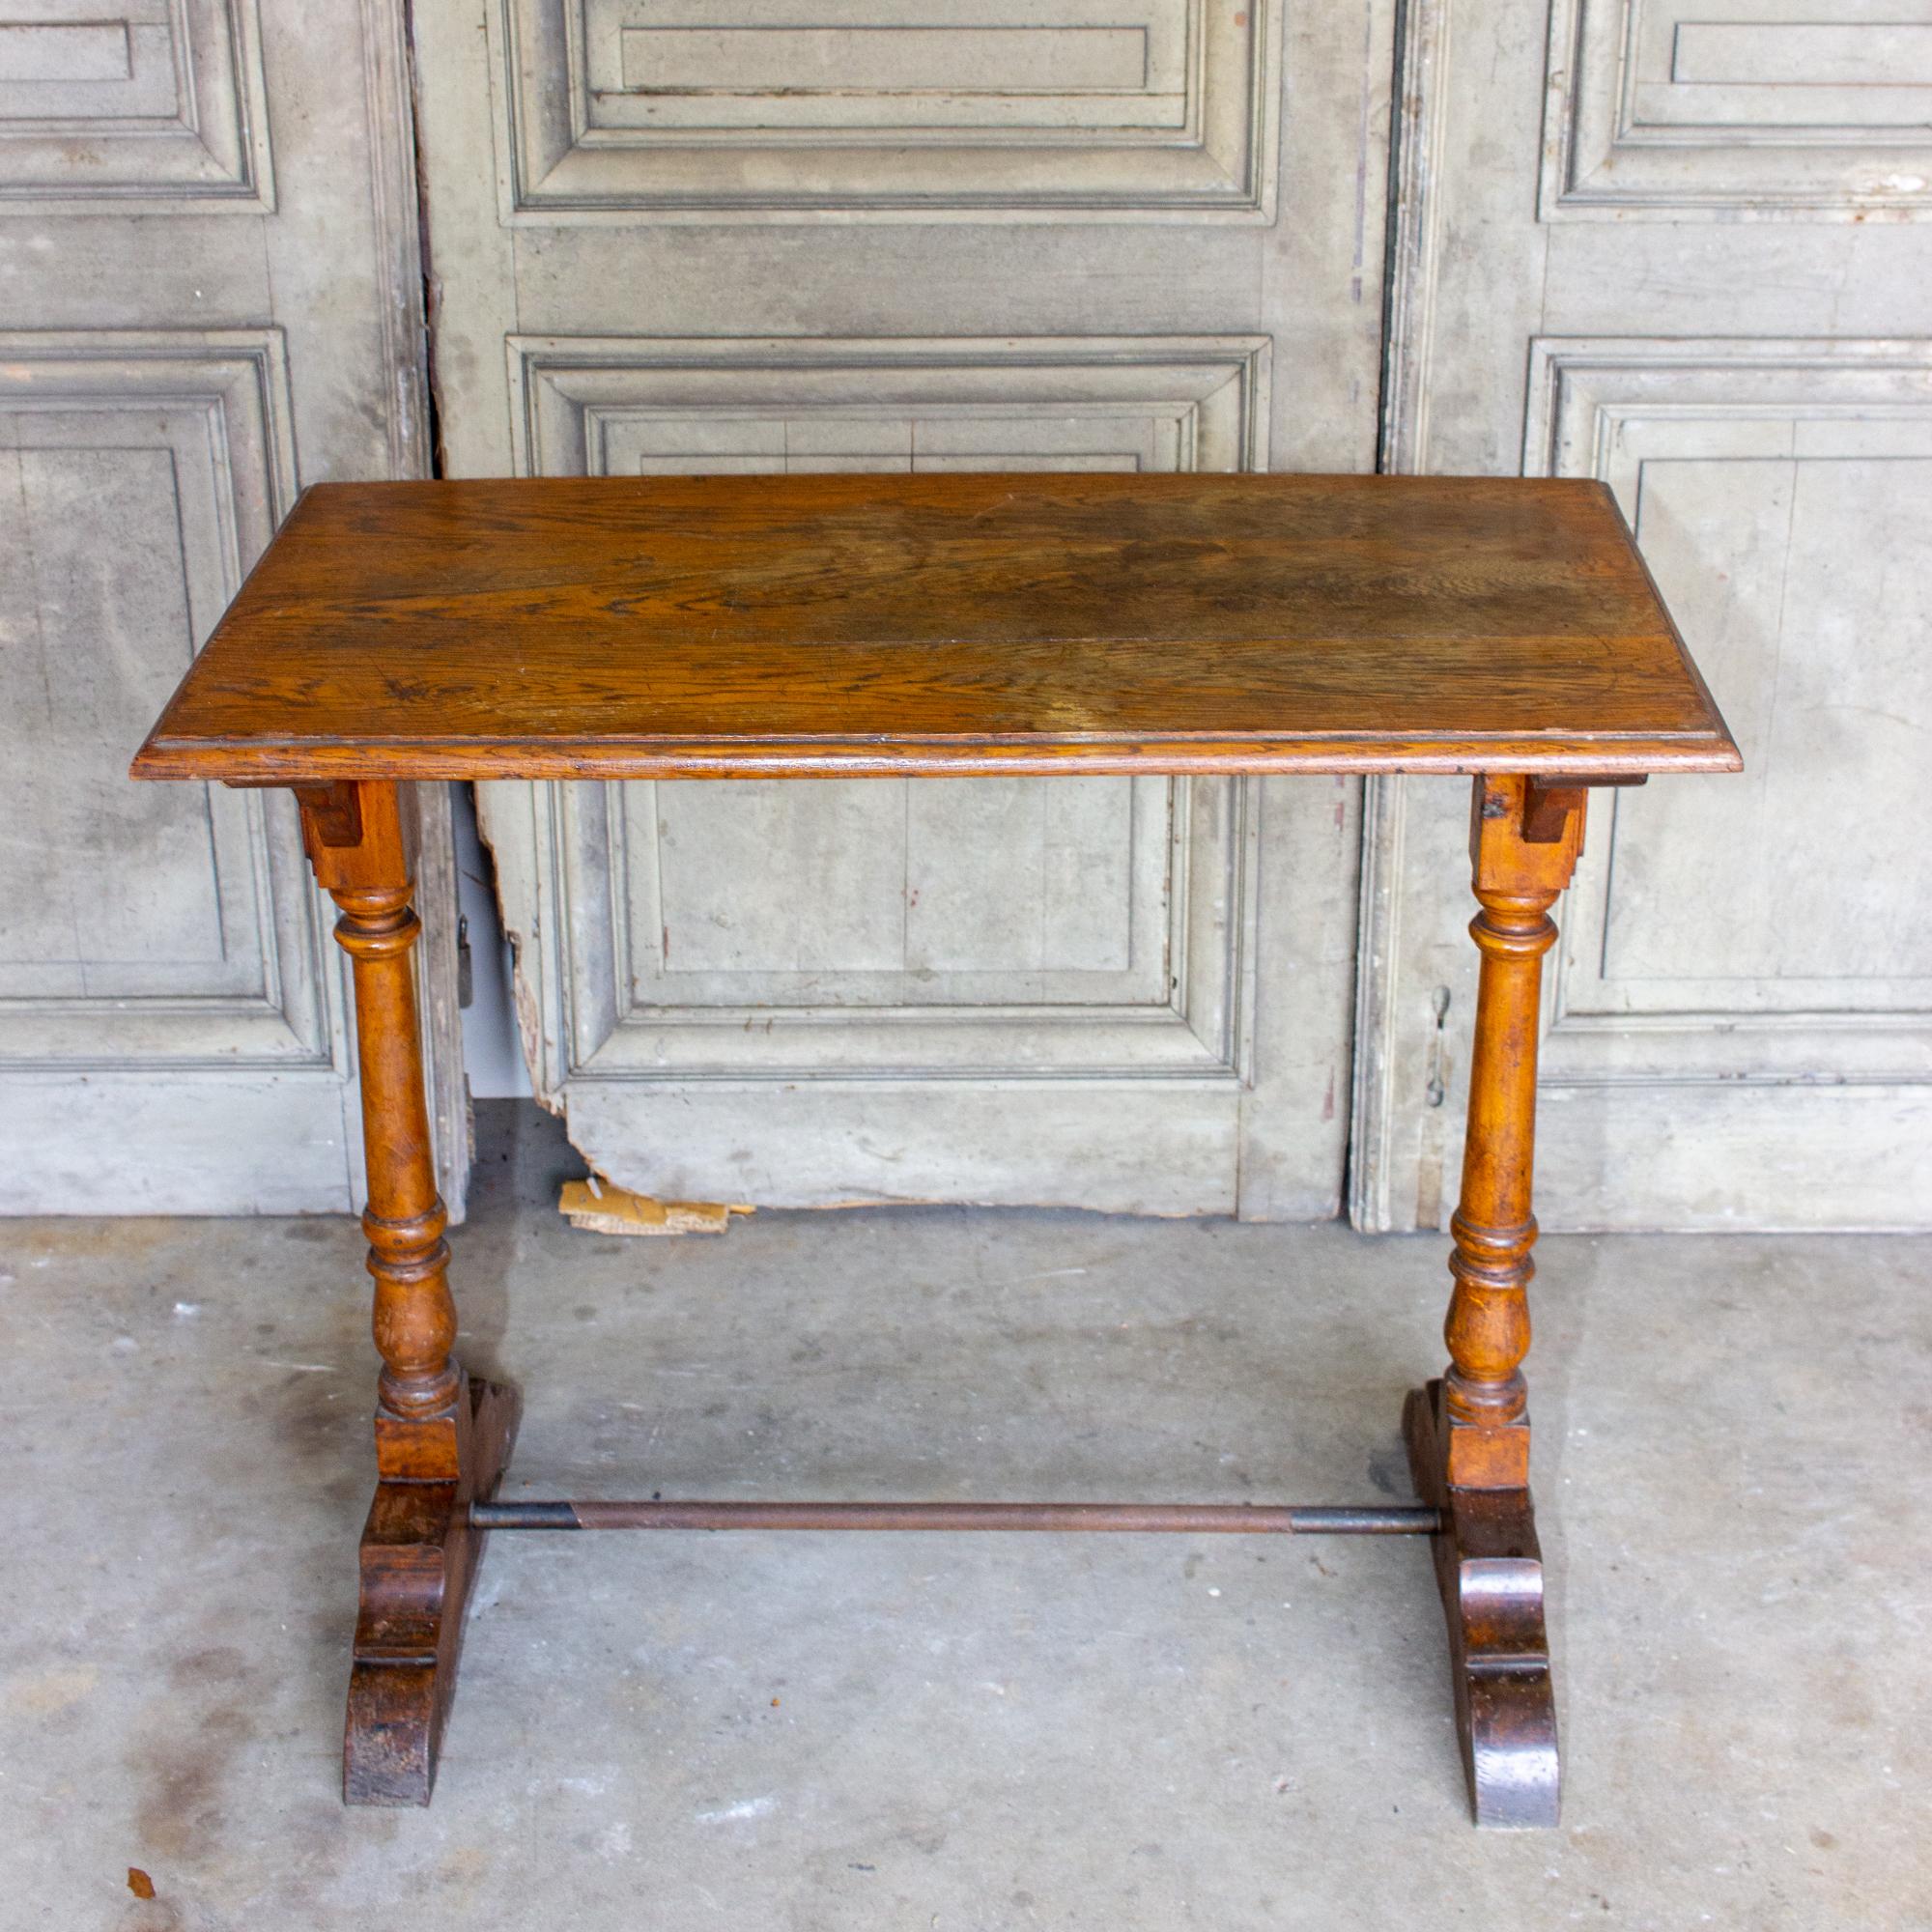 This charming 1940s French bistro table is crafted in wood and metal. The majority of the piece is wood with a brass stretcher at the base between the legs. The legs feature turned details and the rectangular top has a decorative edge. The shape and